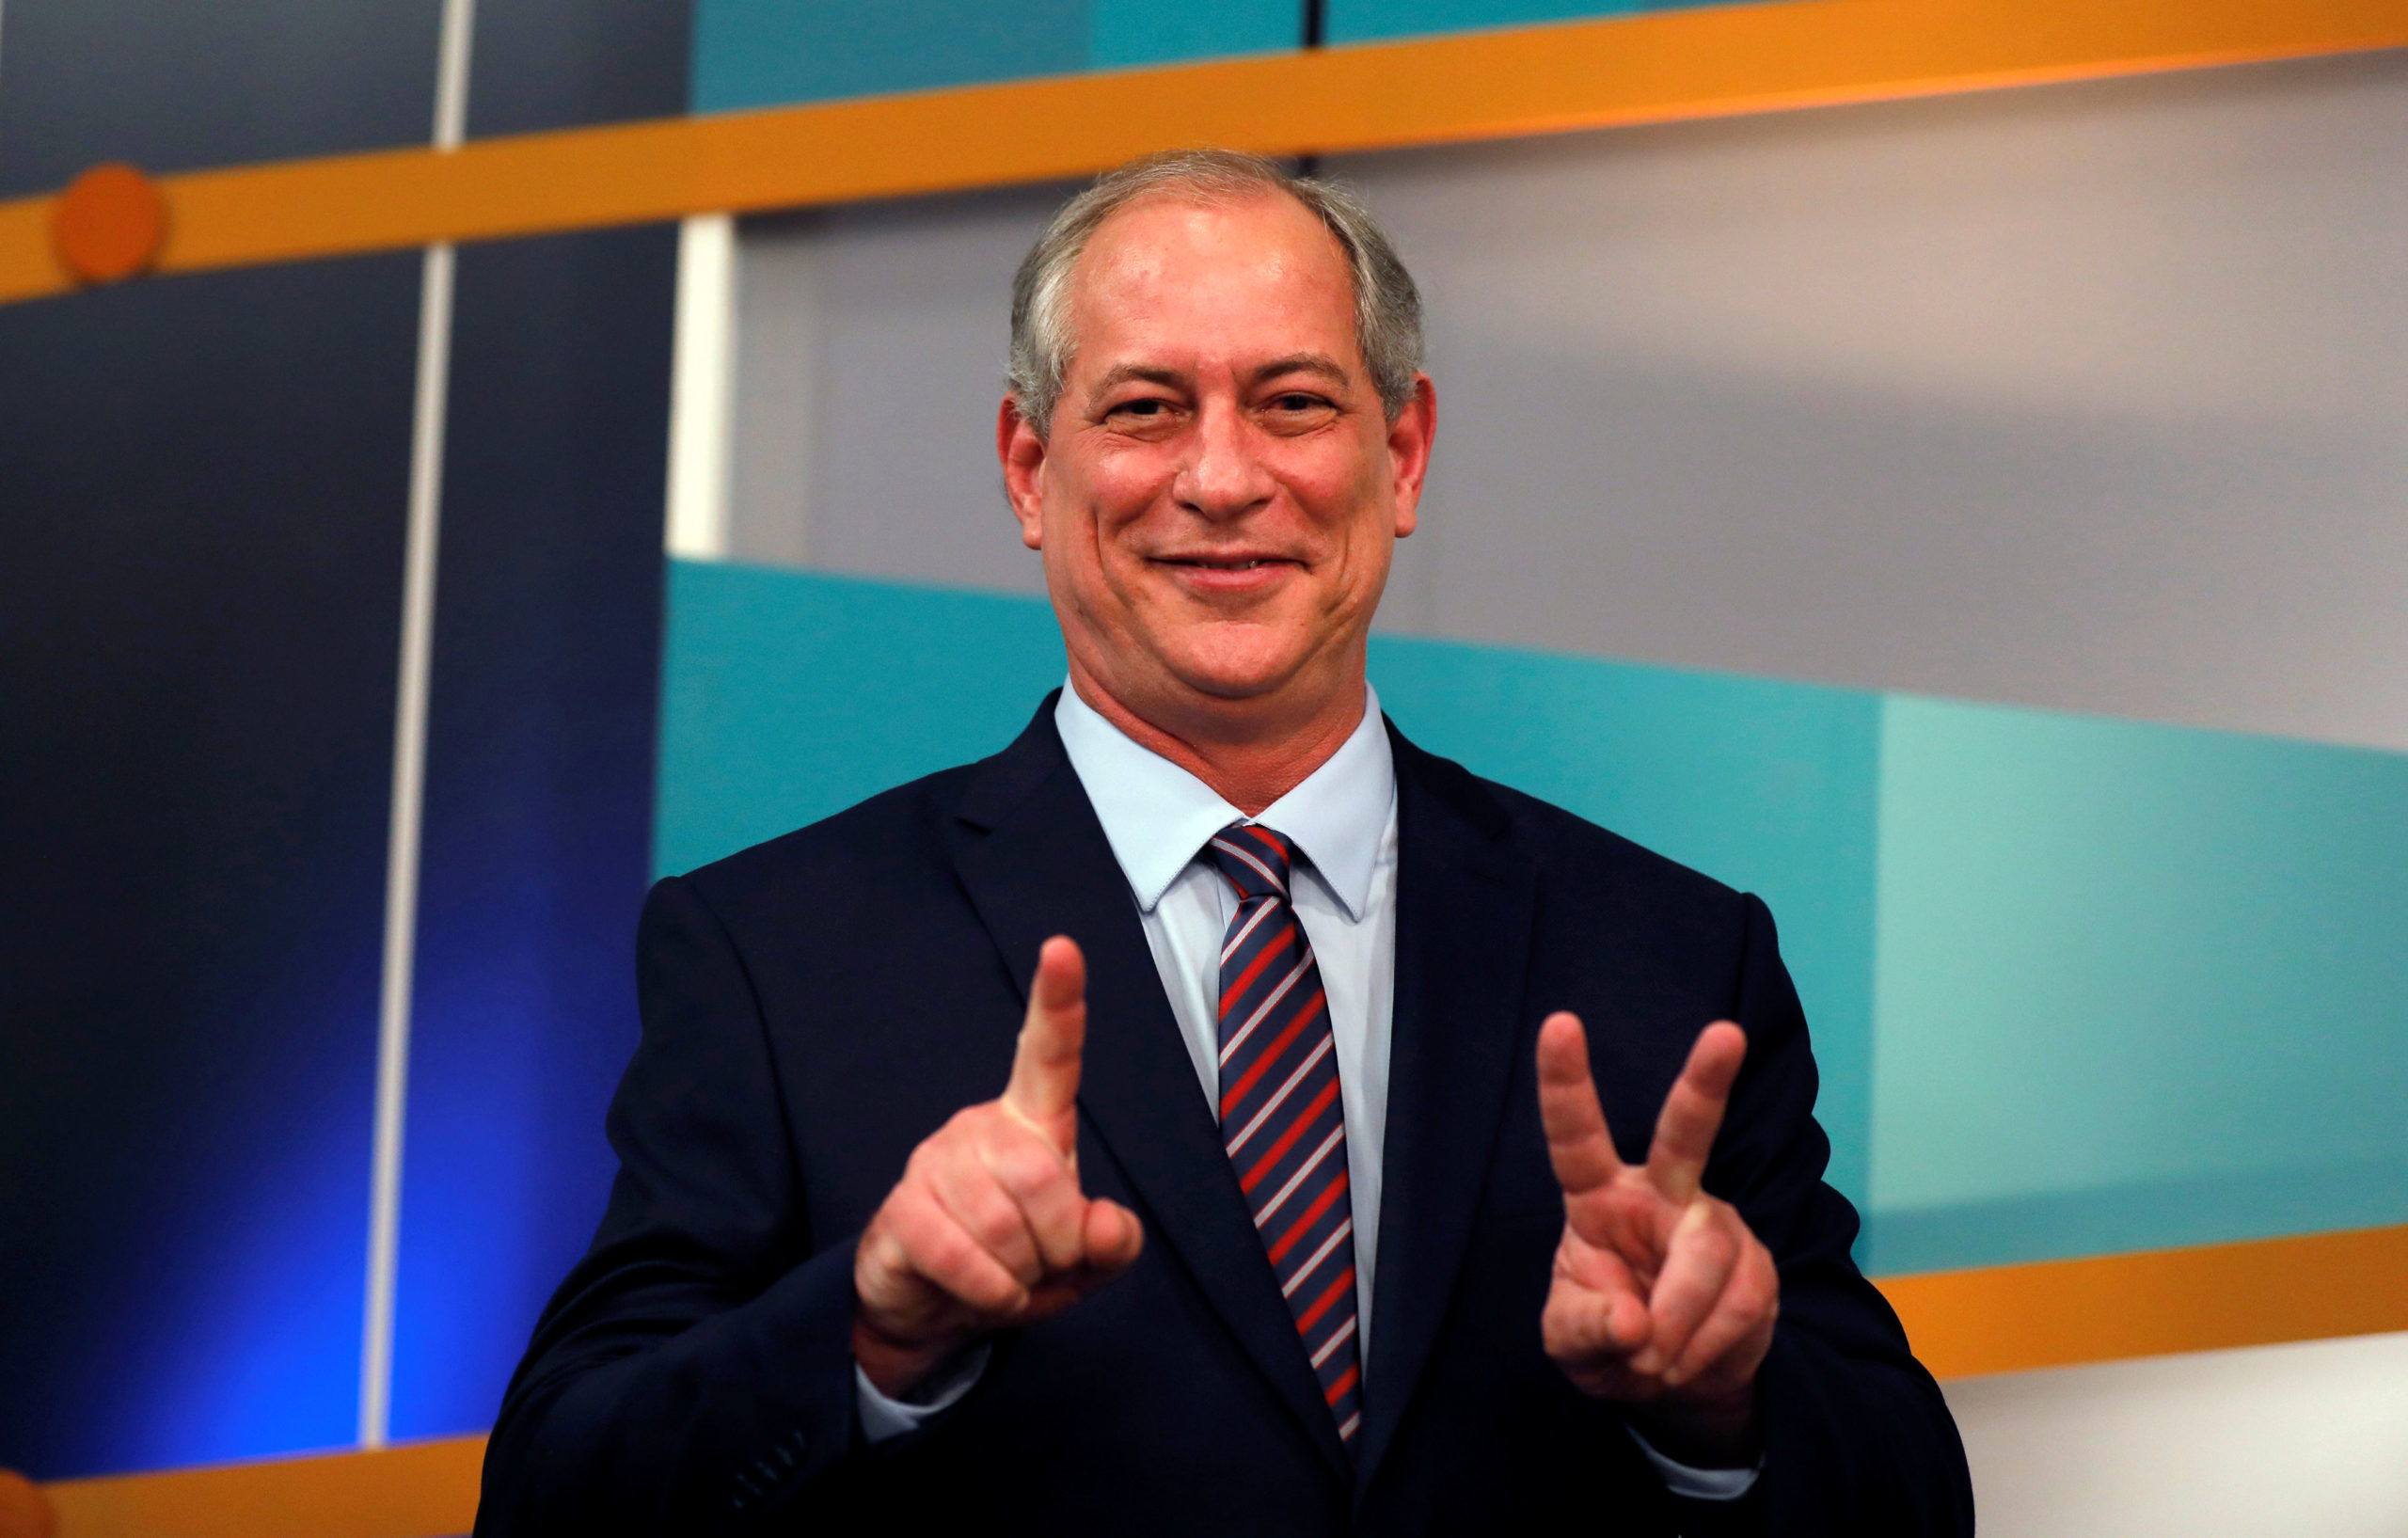 Ciro Gomes has defended the "2 in 1" vote on his social networks: "You vote for one and get rid of the two," he says, in an attempt to draw voters away from the polarization between Lula and Bolsonaro.